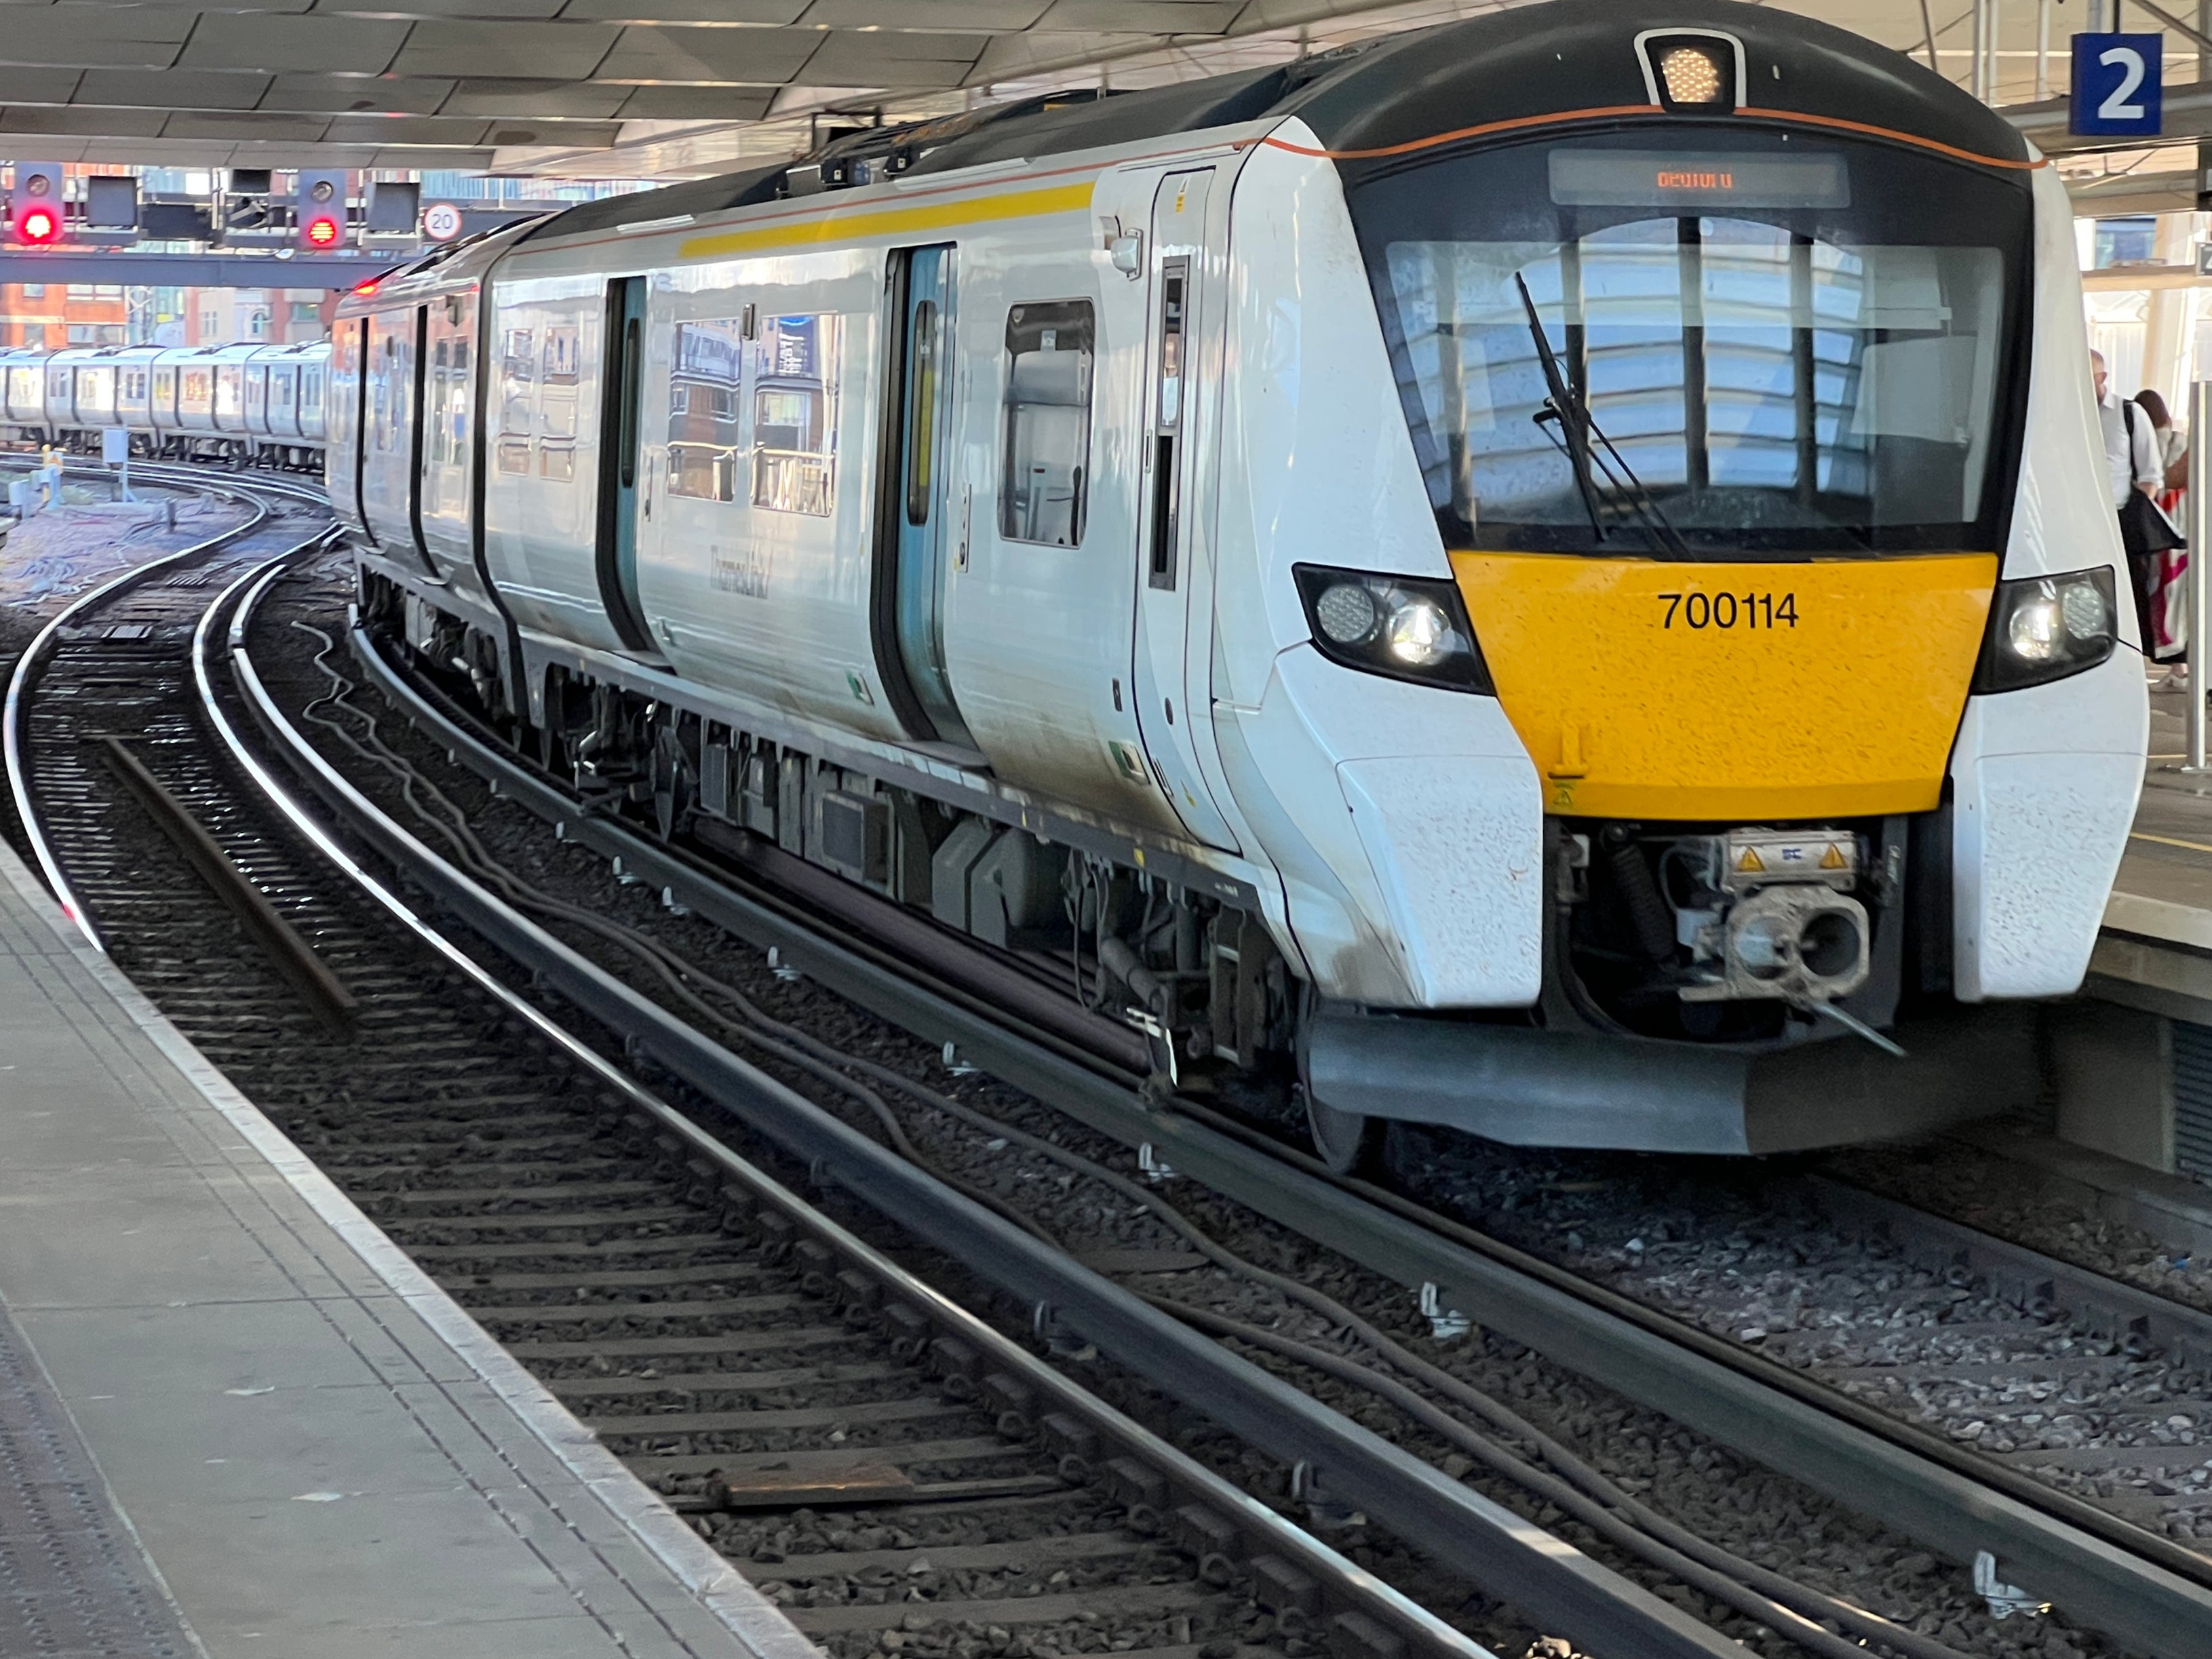 Driver only: a Thameslink train at Blackfriars in central London. Routinely these services are operated with only one member of staff